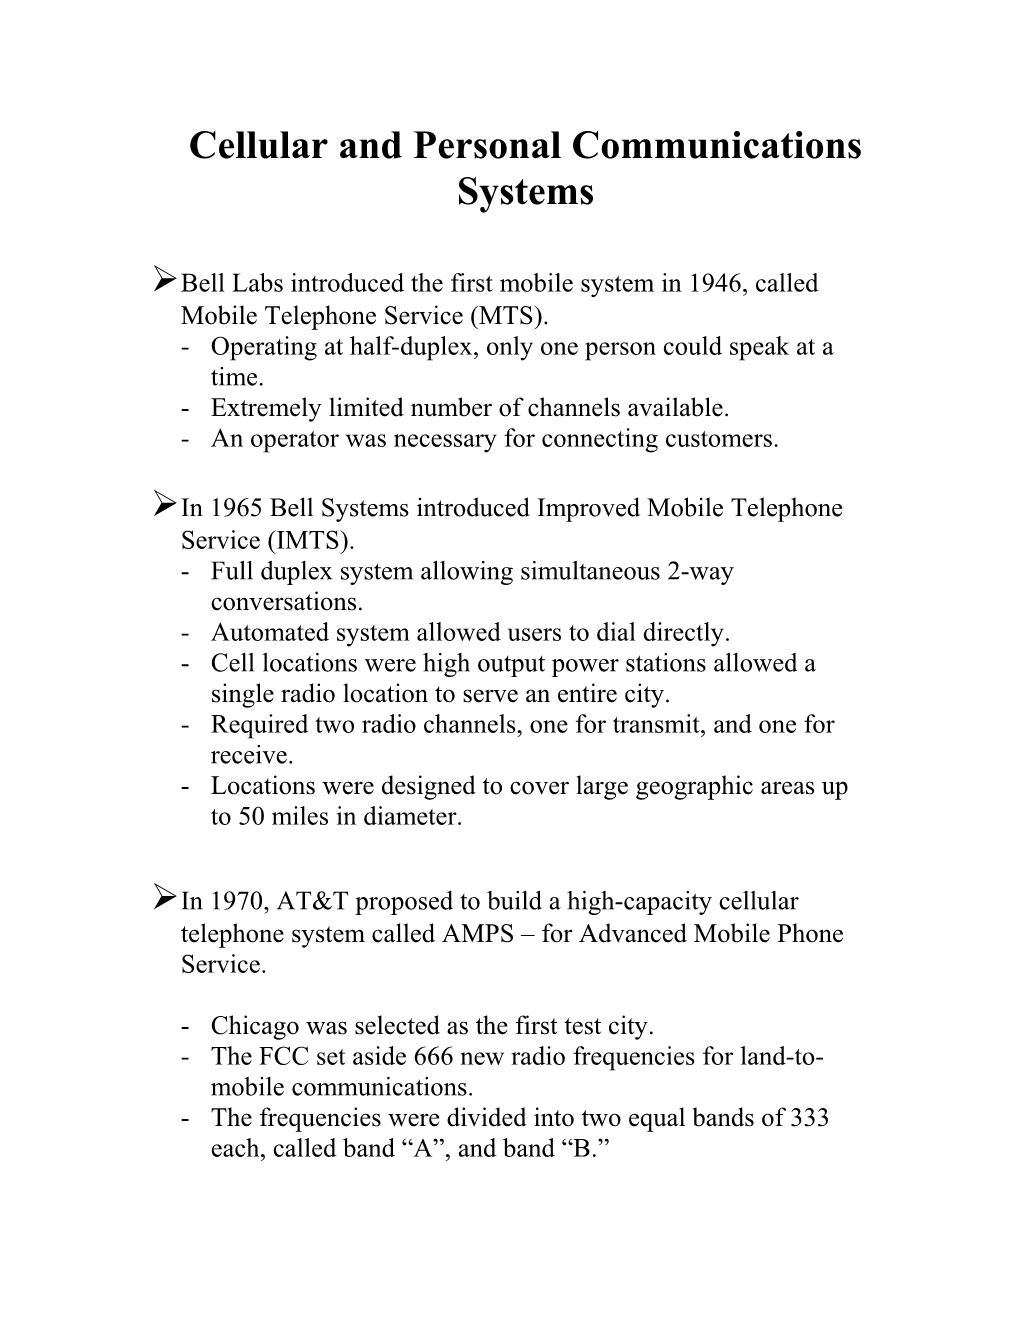 Cellular and Personal Communications Systems